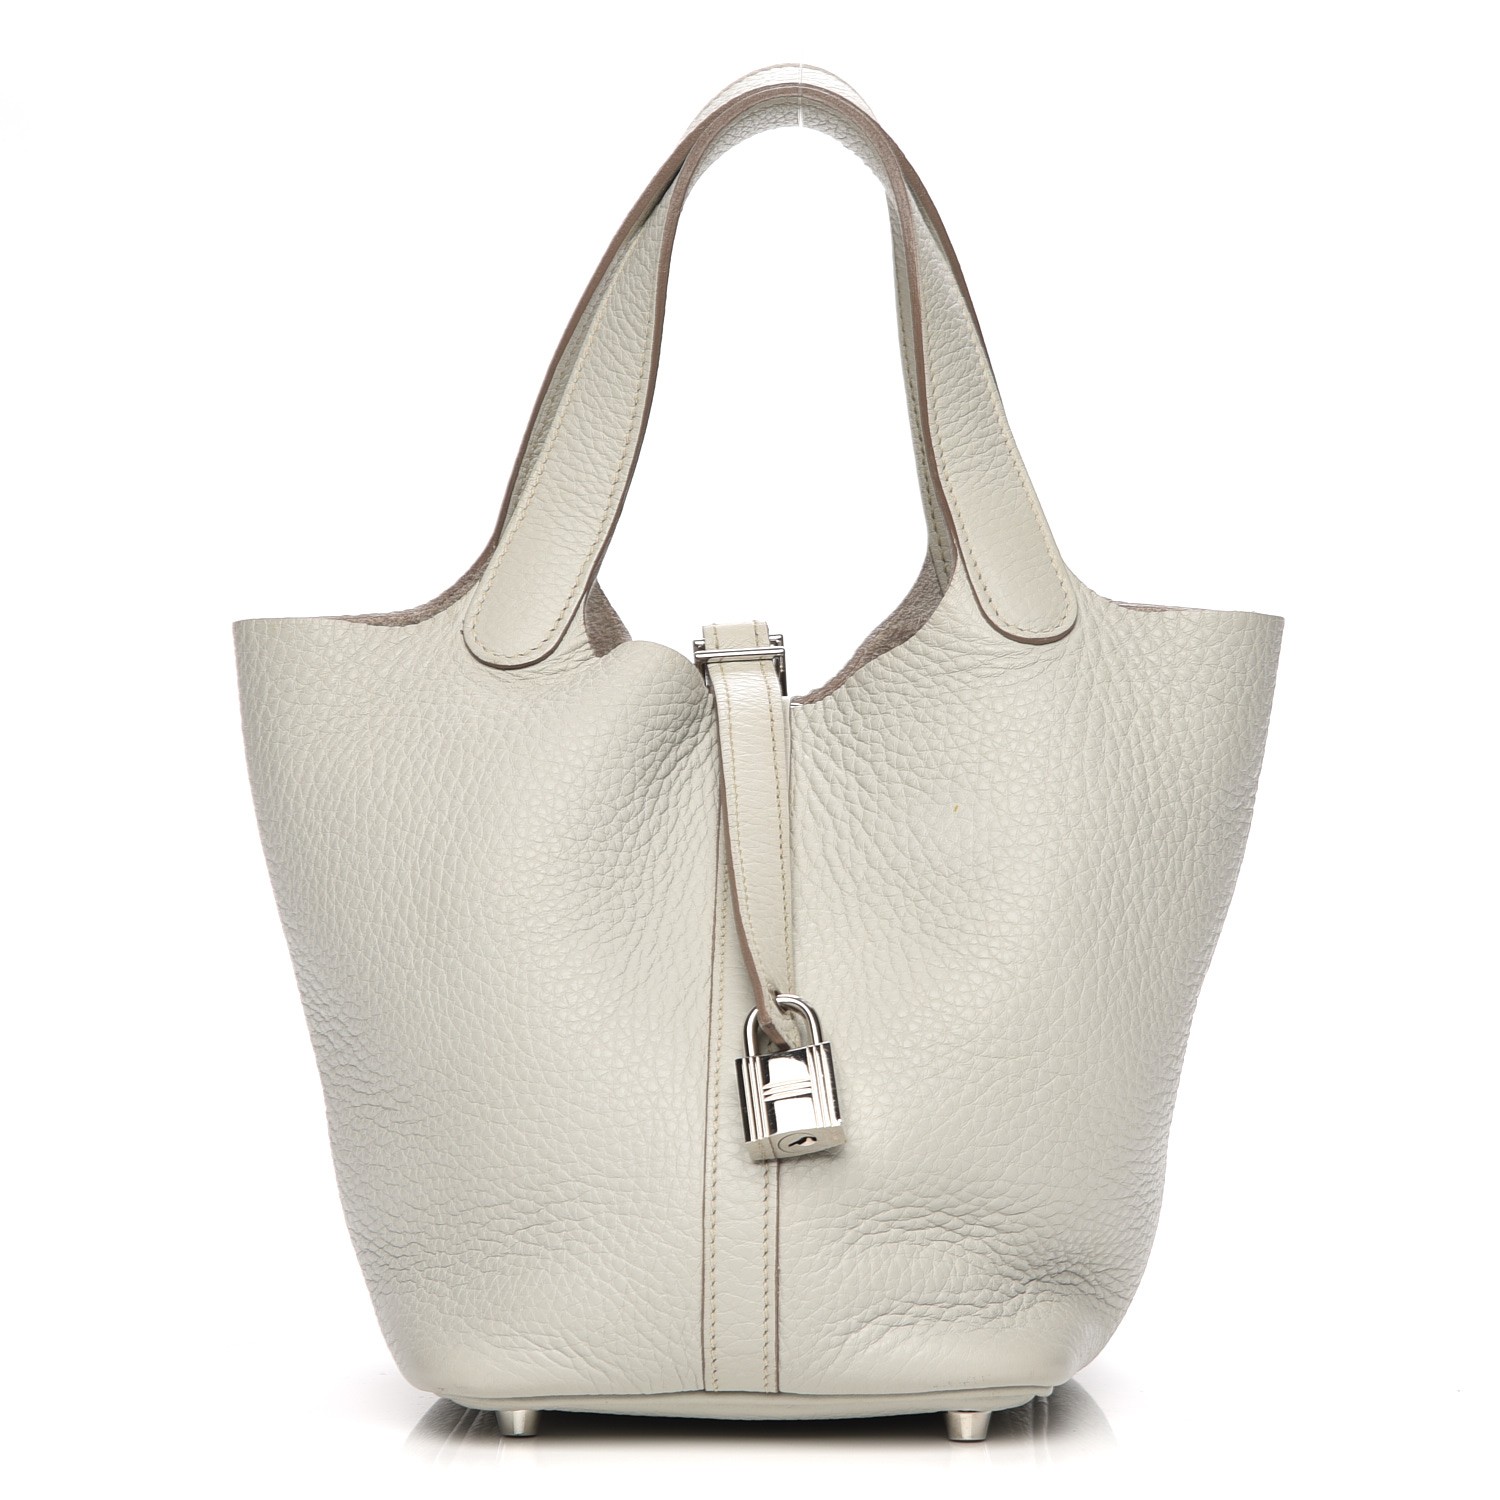 HERMES Taurillon Clemence Picotin Lock 18 PM Gris Perle 209092